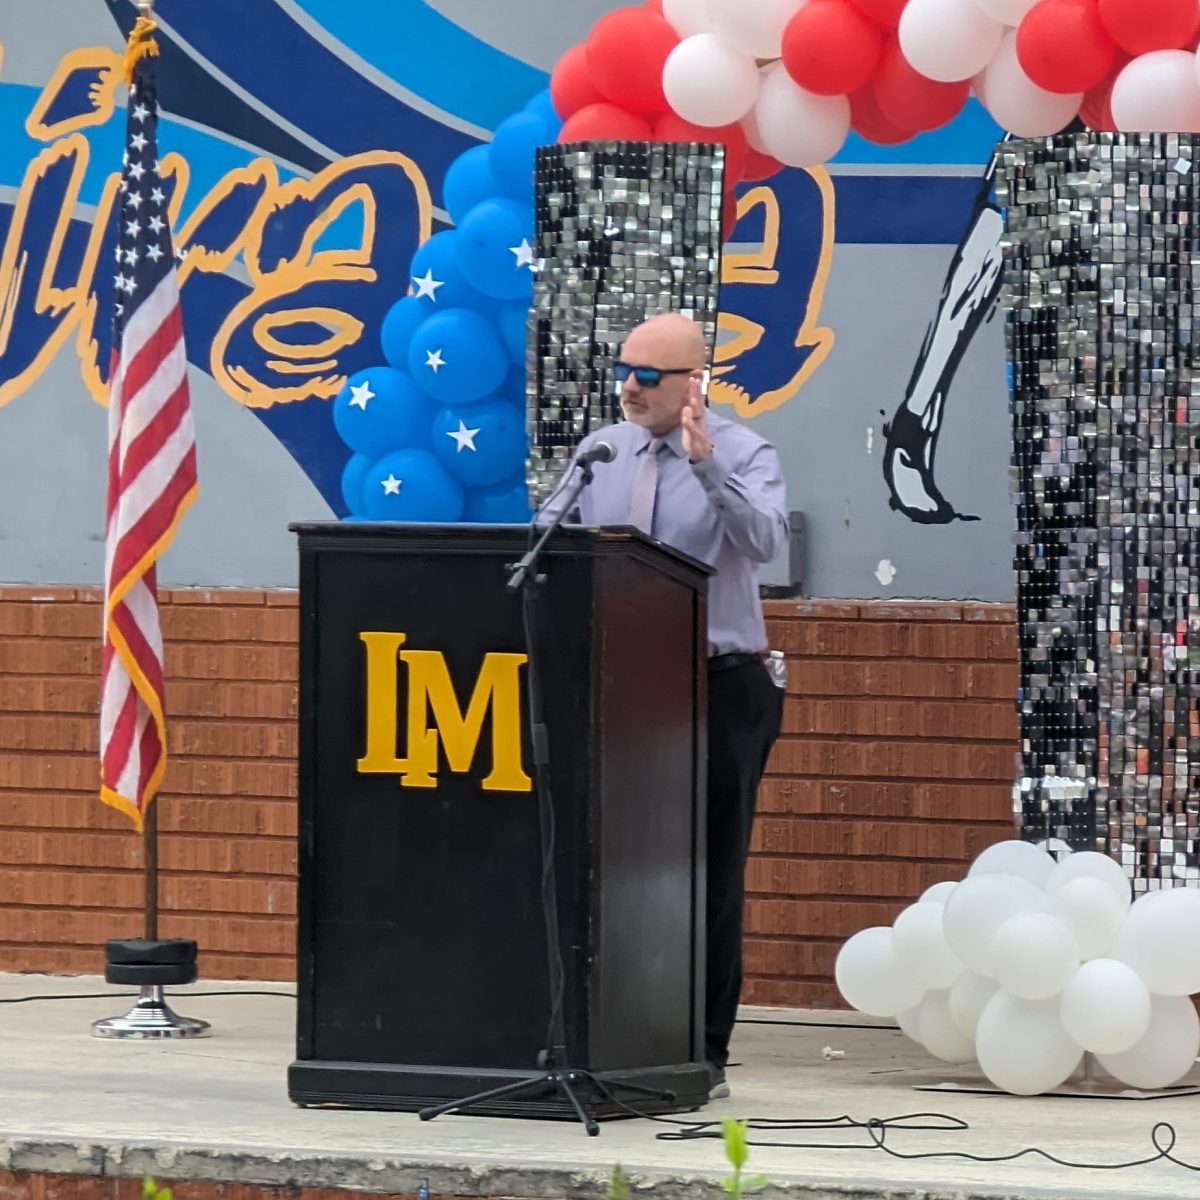 Principal Ben Webster speaks to the La Mirada High School staff and students during the September 11 Remembrance assembly.